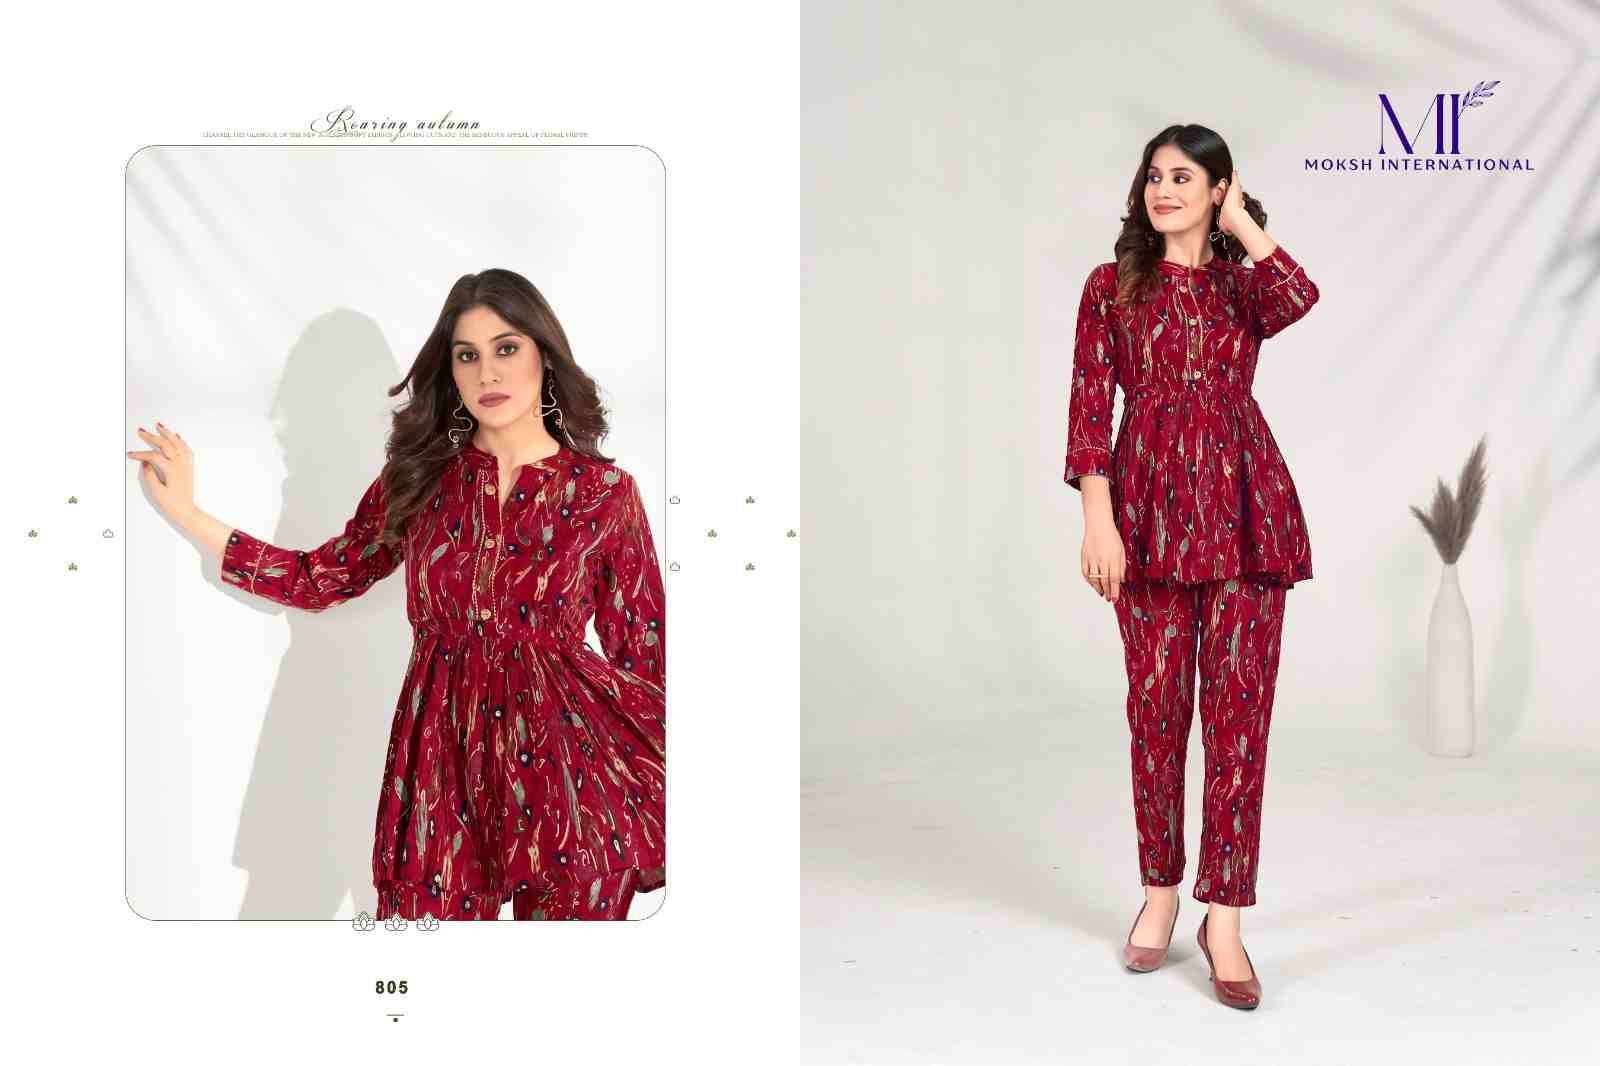 Co-Ord Set Milky Vol-1 By Moskh International 801 To 806 Series Designer Stylish Fancy Colorful Beautiful Party Wear & Ethnic Wear Collection Premium Rayon Co-Ord At Wholesale Price